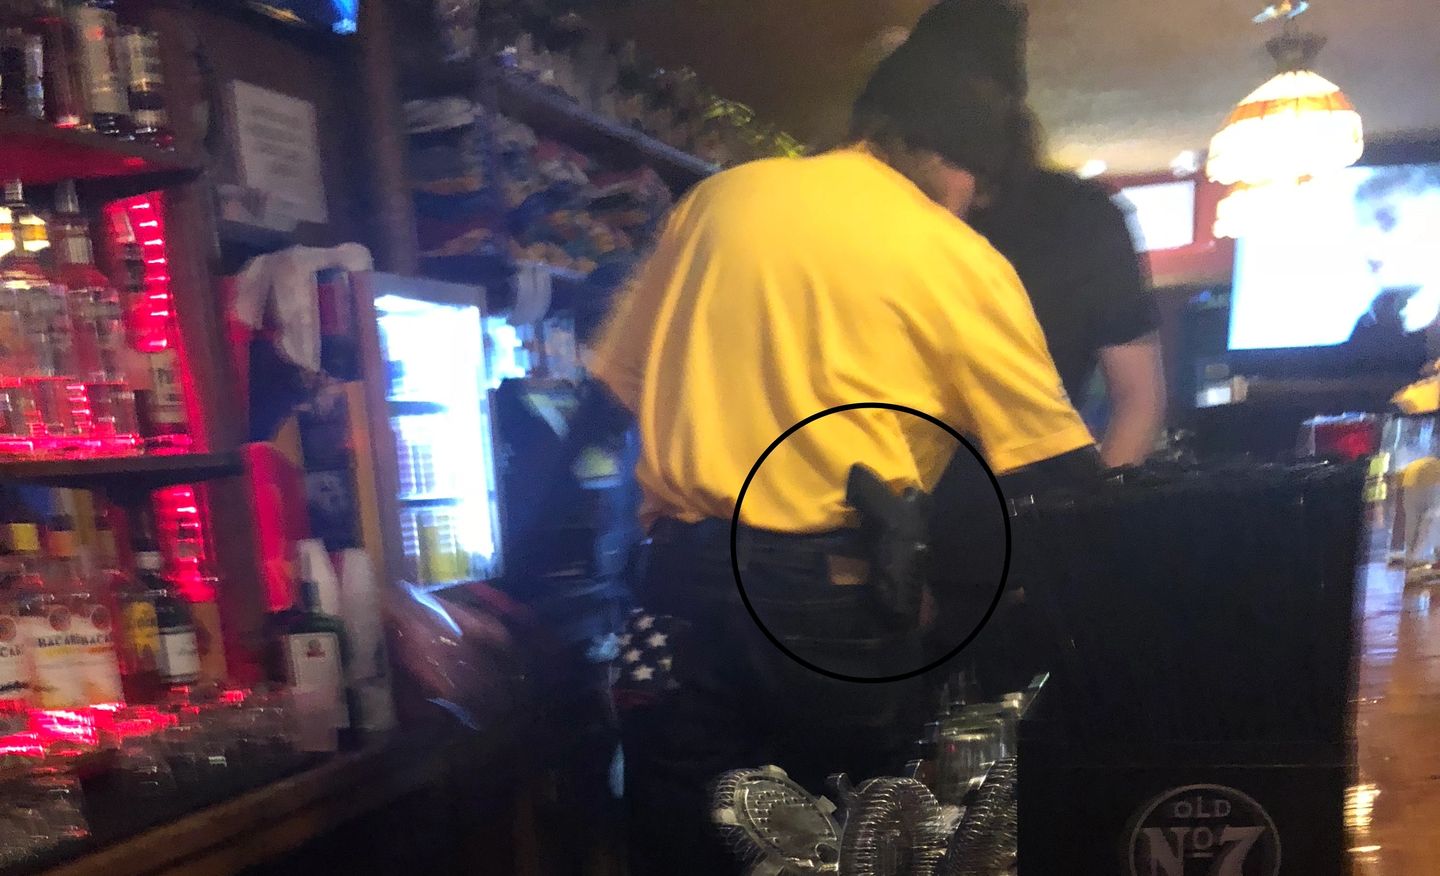 You are currently viewing West Virginia bartender pouring beer, wearing open-carry sidearm